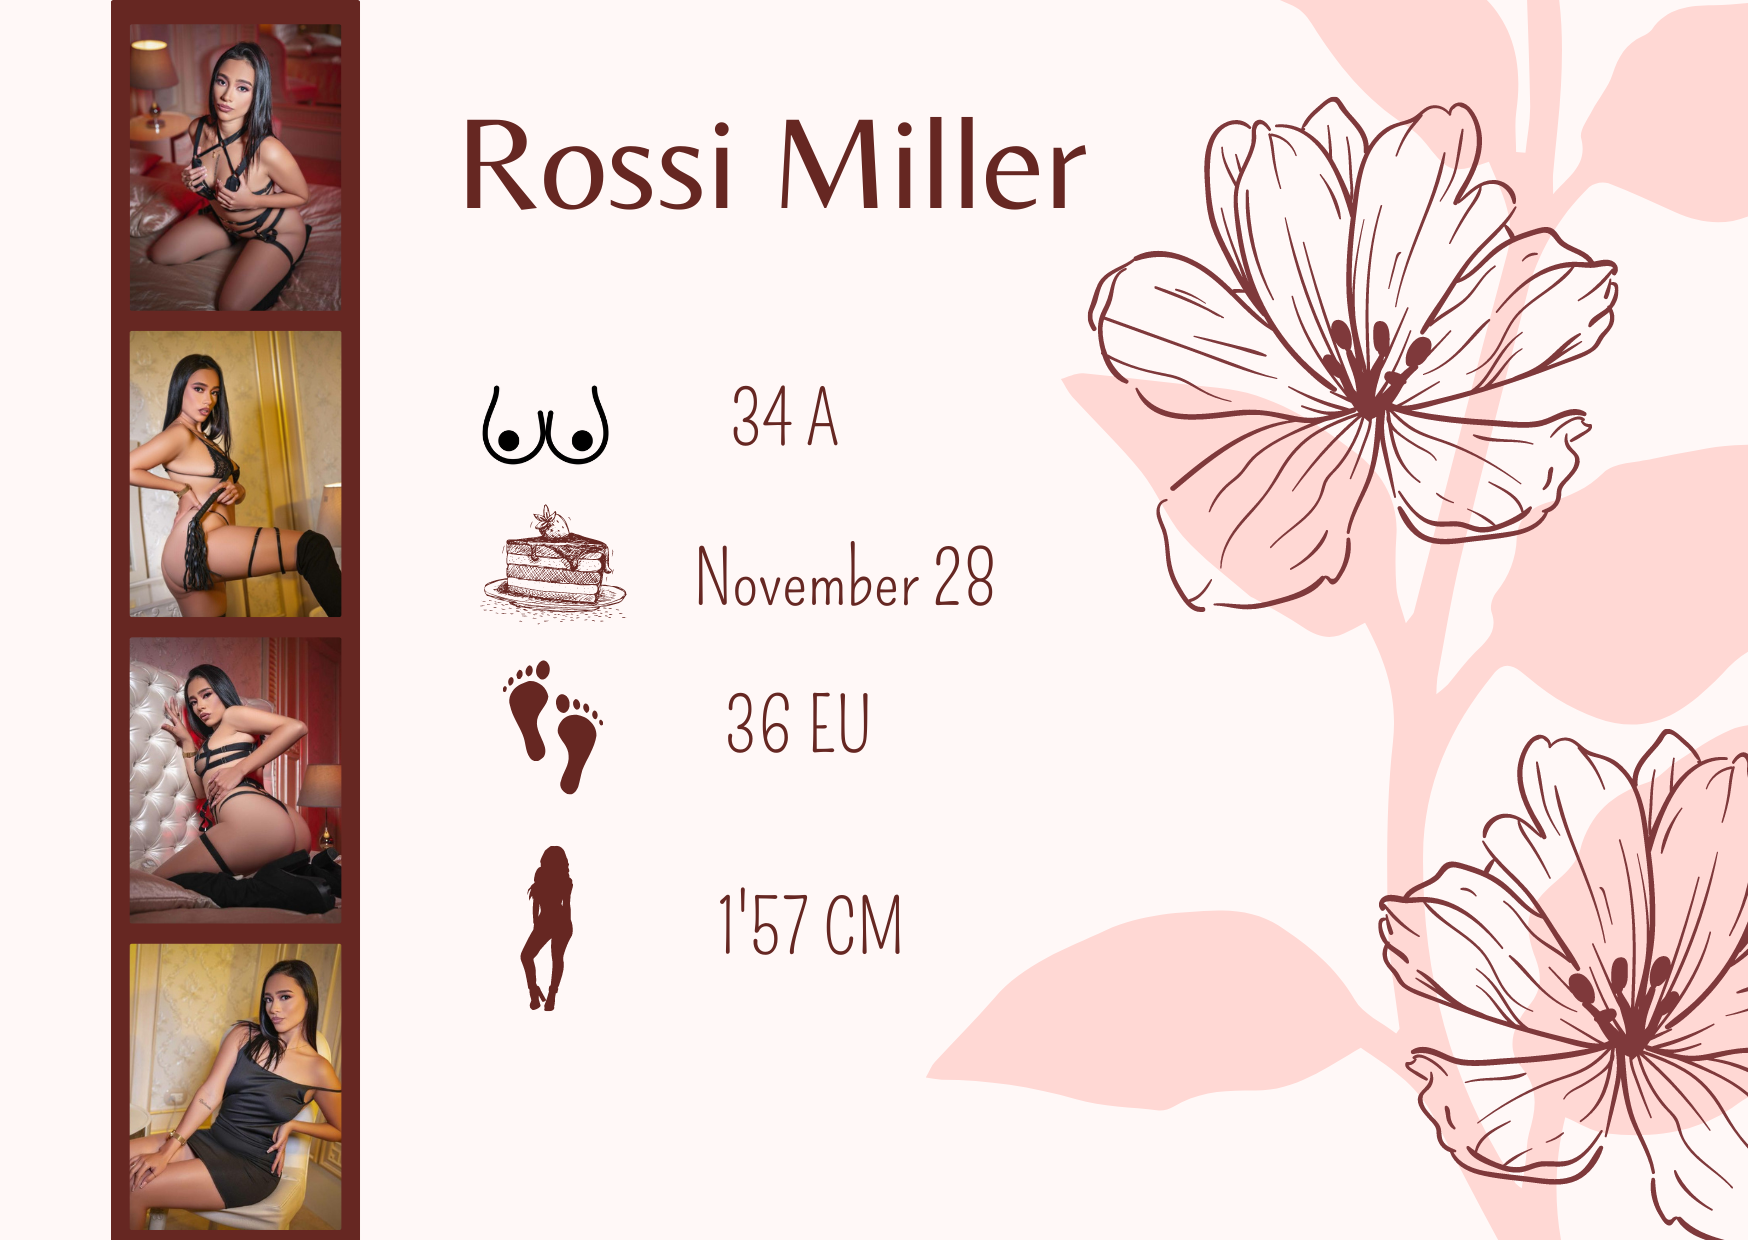 RossiMiller About Me image: 1